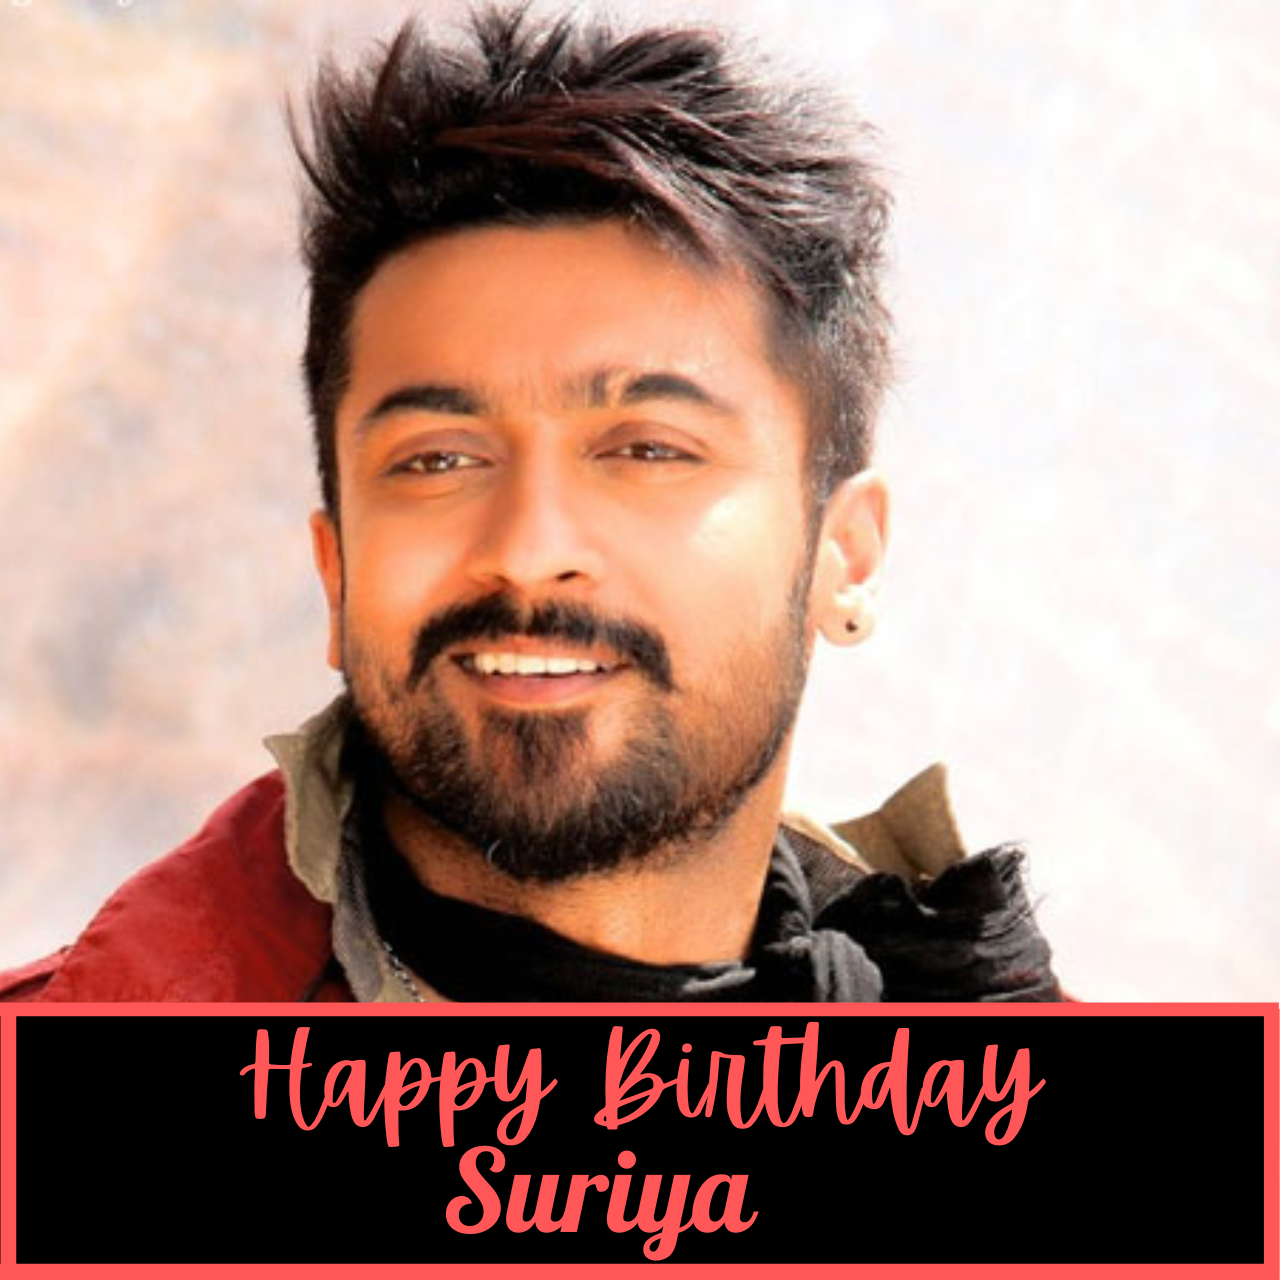 Happy Birthday Suriya 2022: Wishes, Banners, Images, Quotes, and WhatsApp Status Video to Download